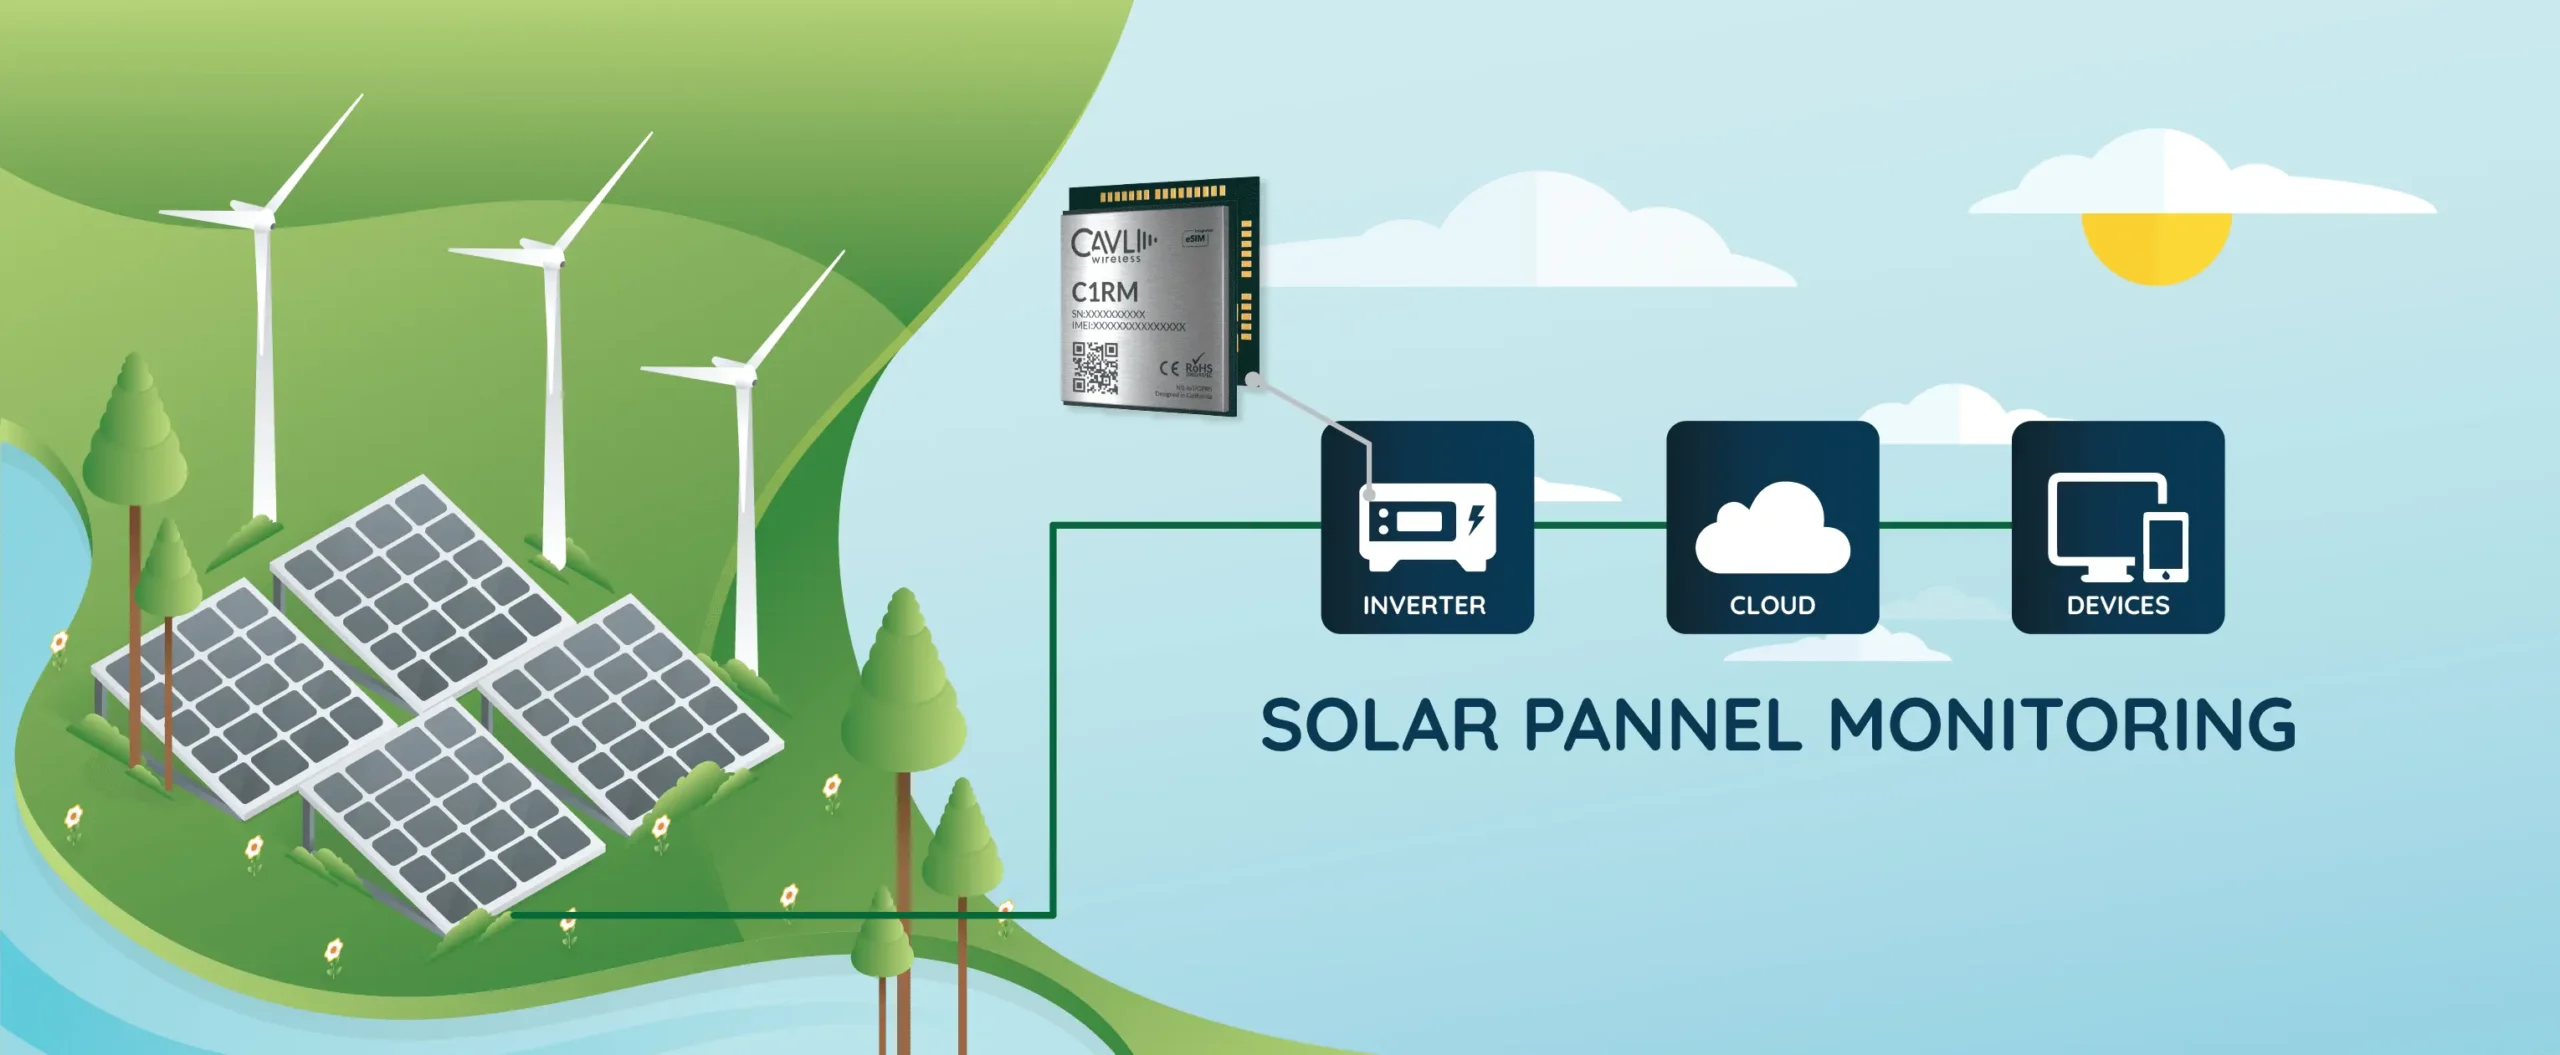 cellular connectivity for solar panels - Do solar panels work without Wi-Fi